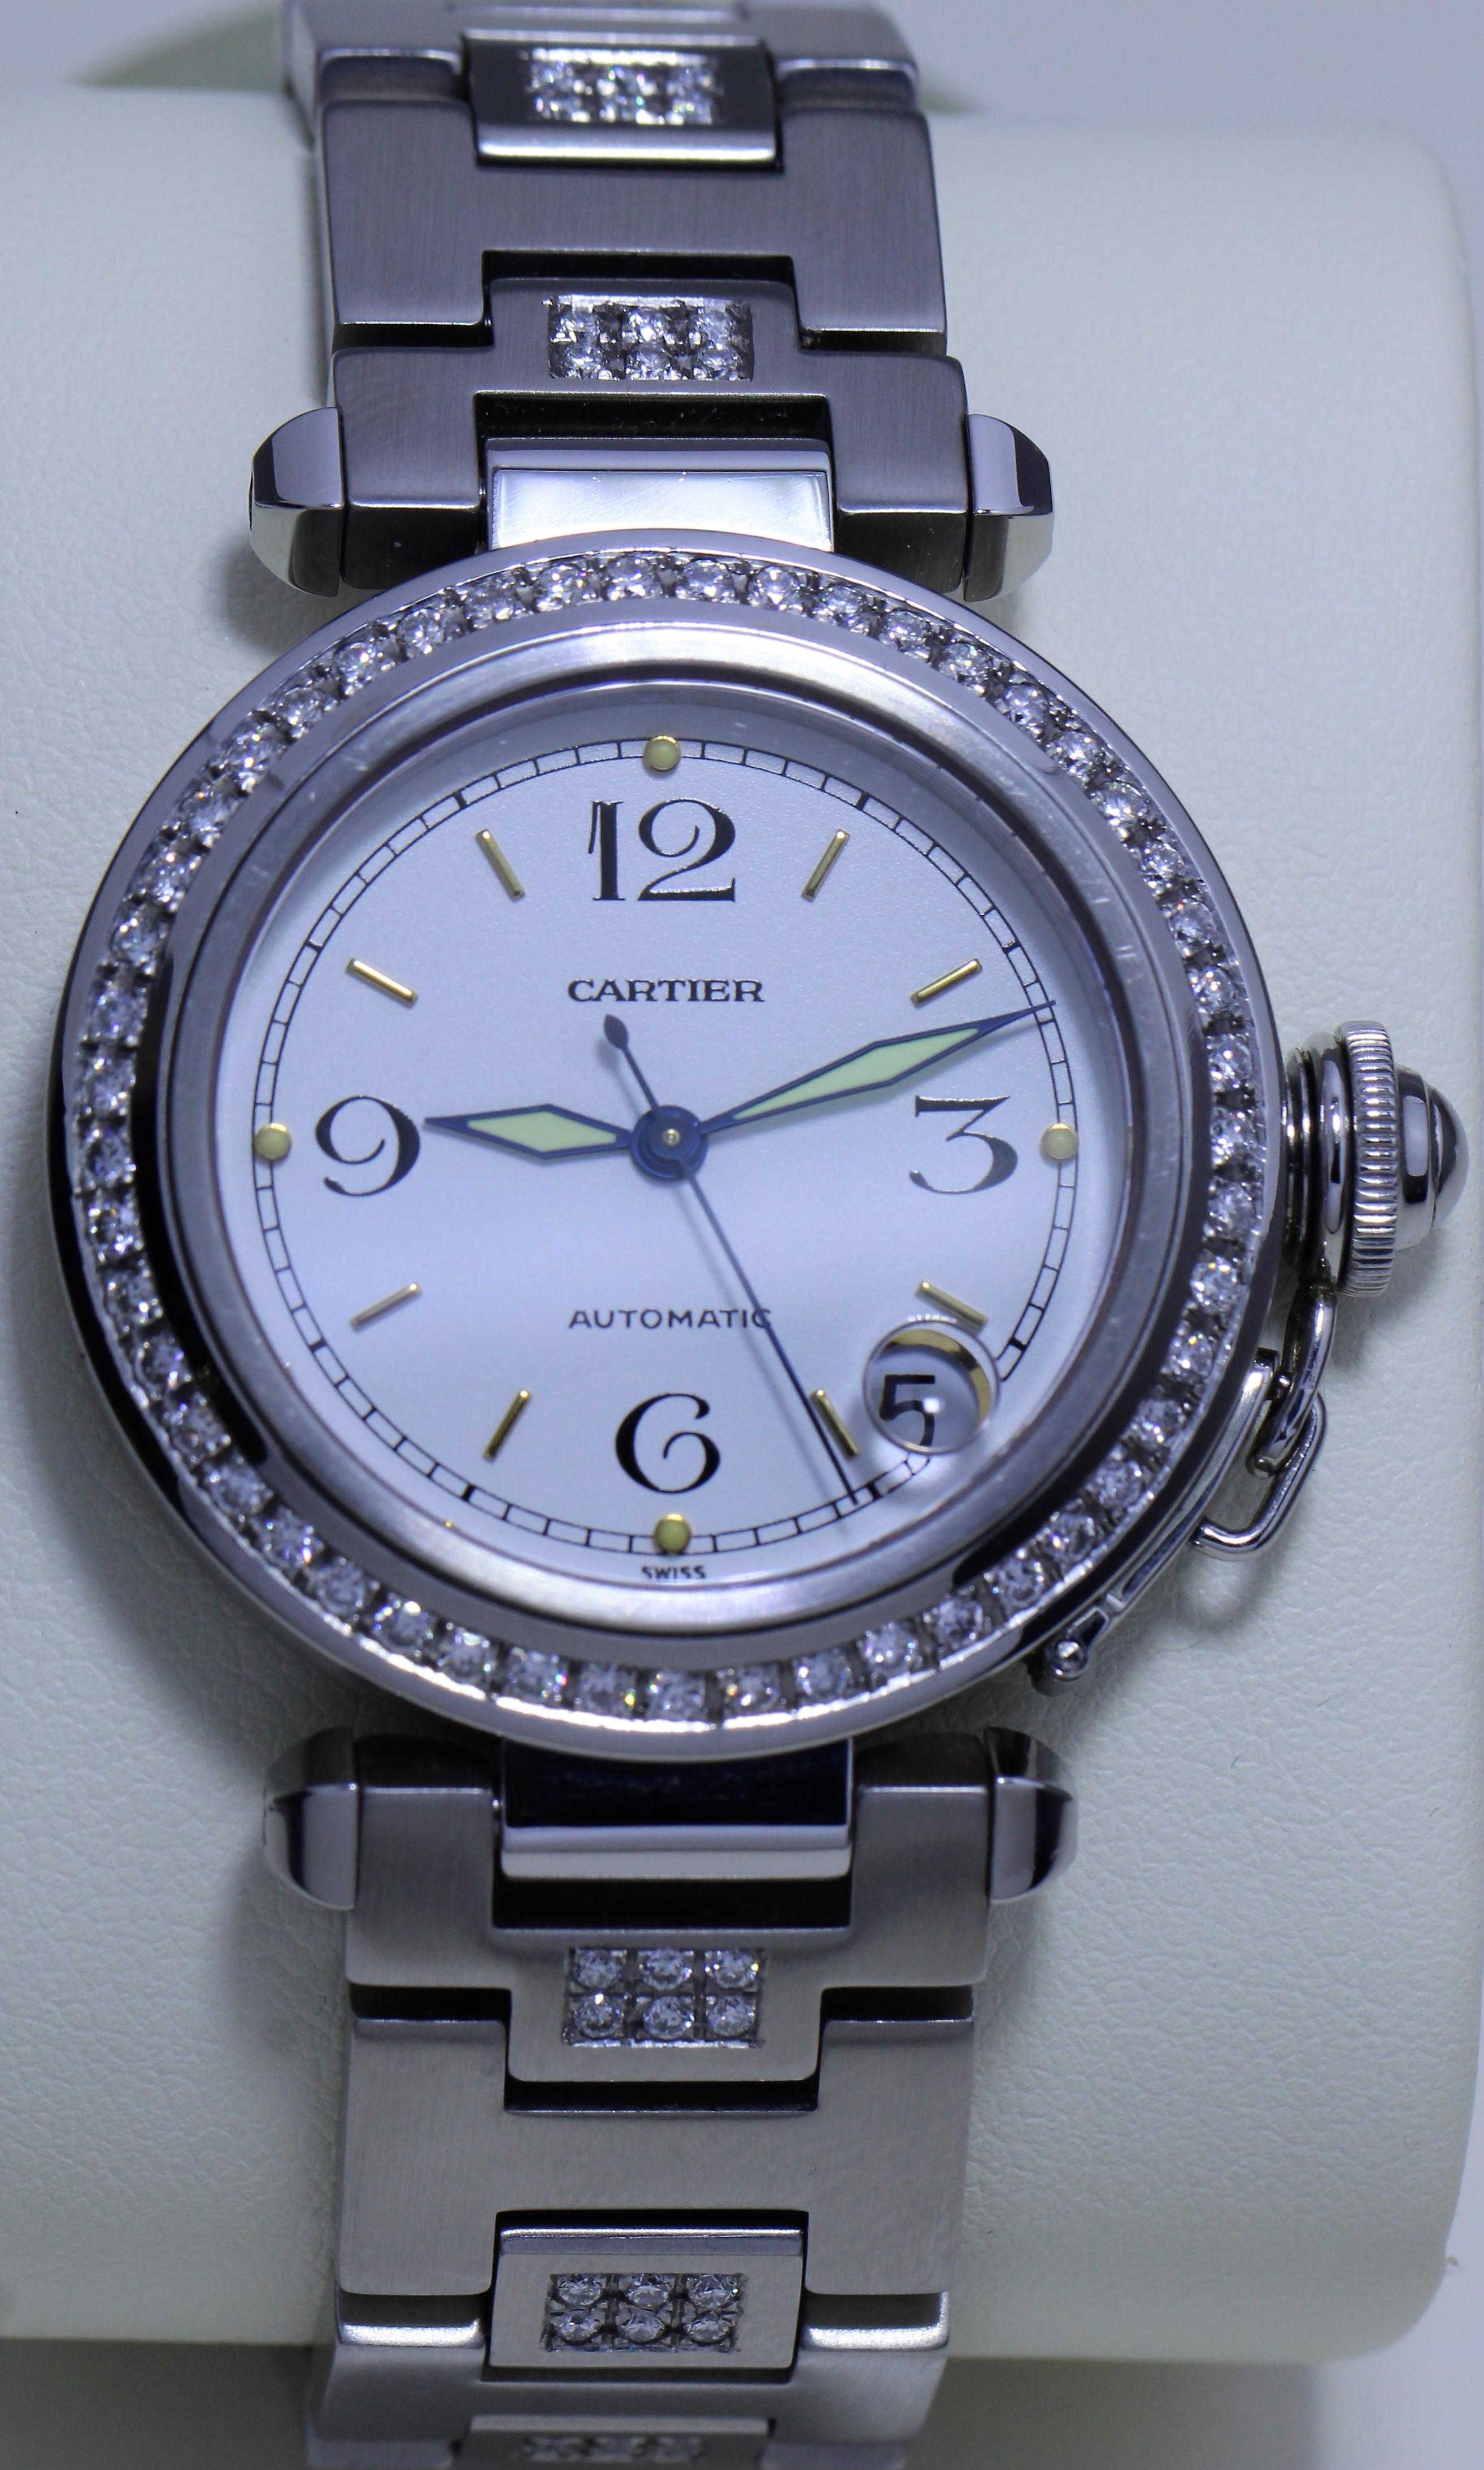 Cartier Men's Diamond Studded Automatic Watch

Diamond Studded band and bezel
White Face with Date Display
Phosphorescent hands